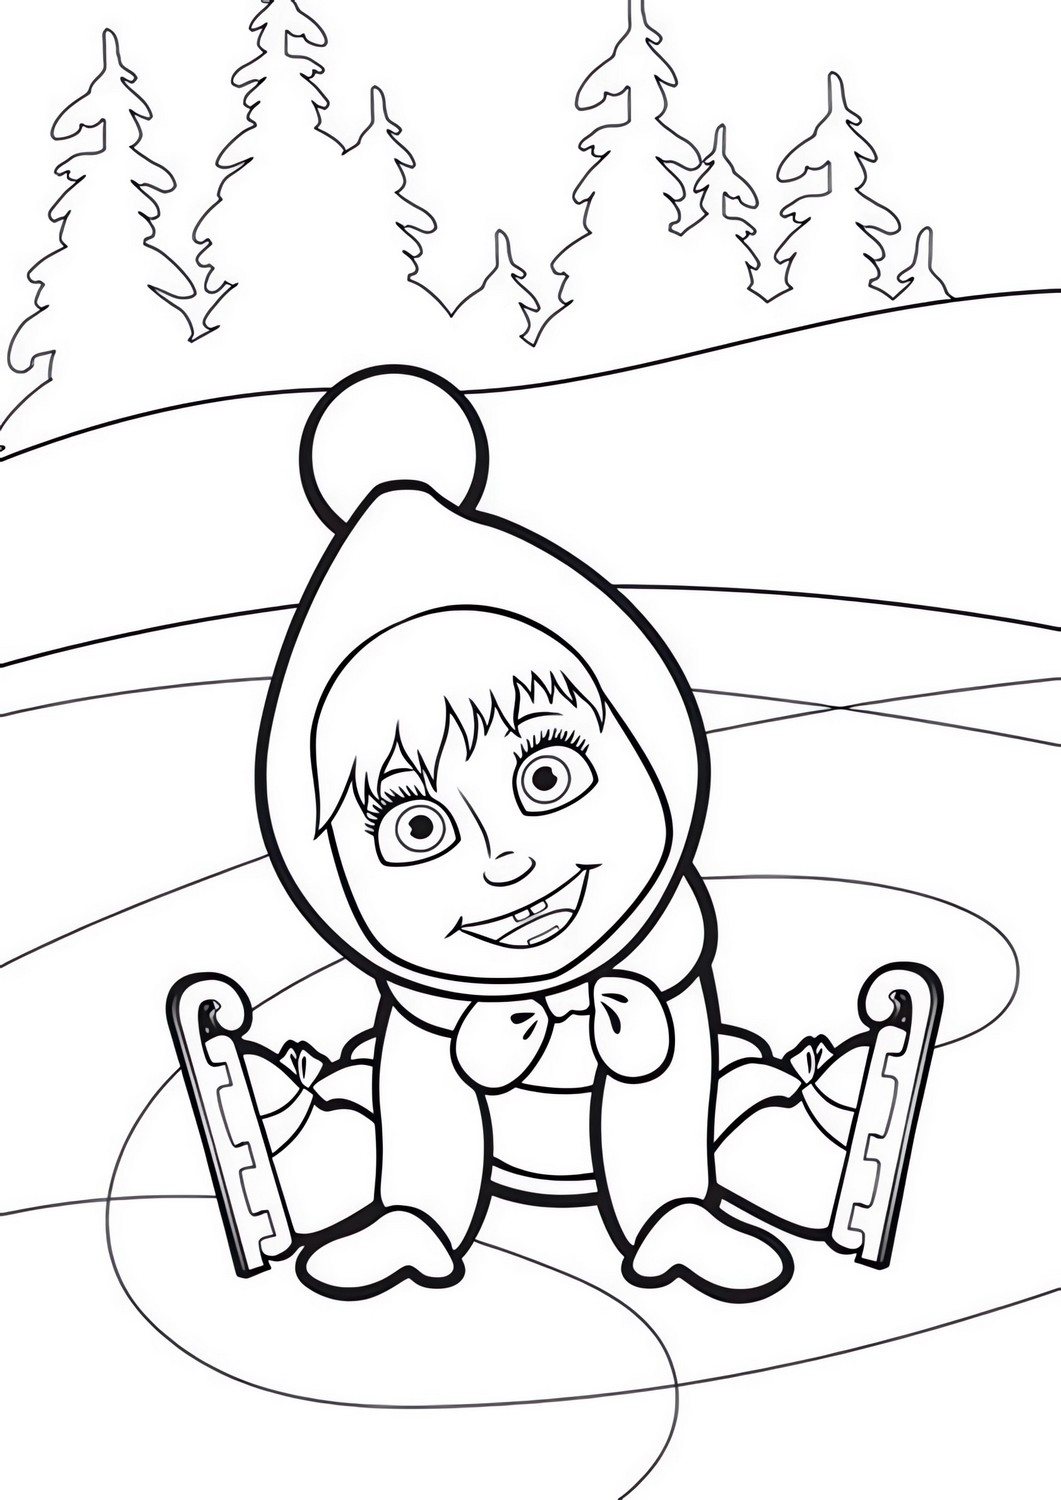 Drawing 01 of Masha and the Bear to print and color